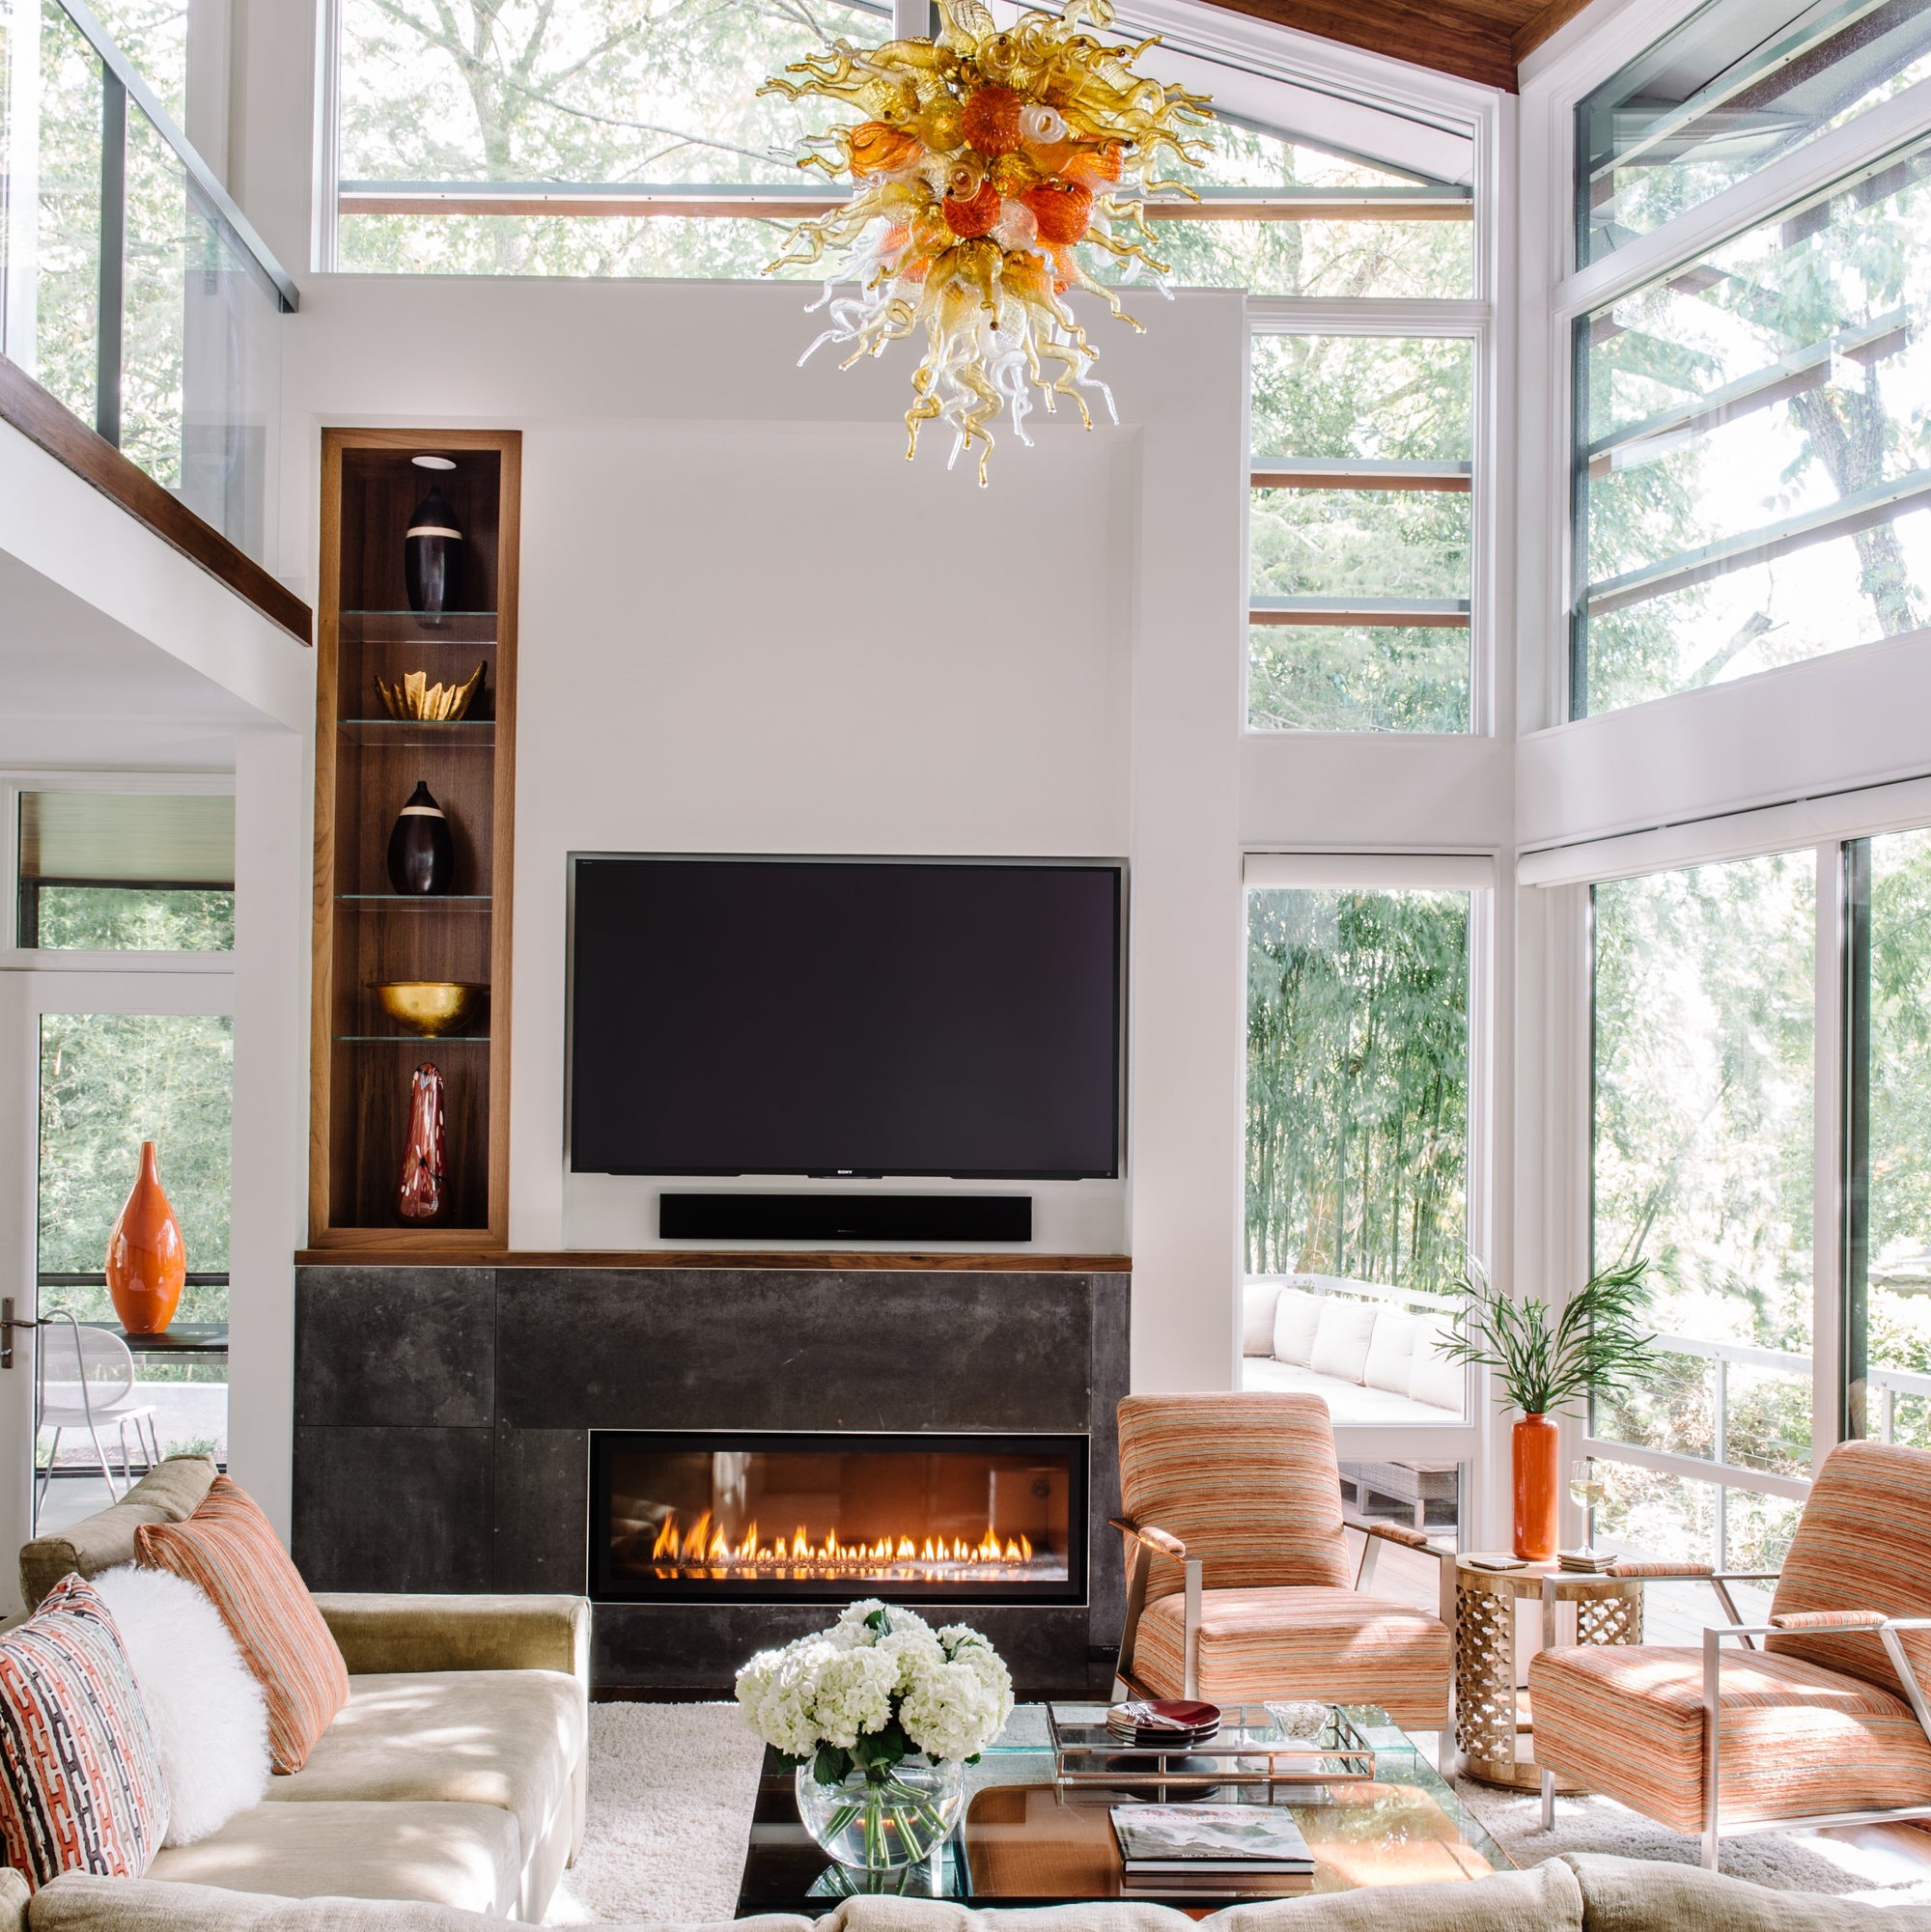 Family room with mid-century modern style featuring art glass chandelier, slate fireplace, and neutral and orange furnishings. Jamie Merida Interiors.